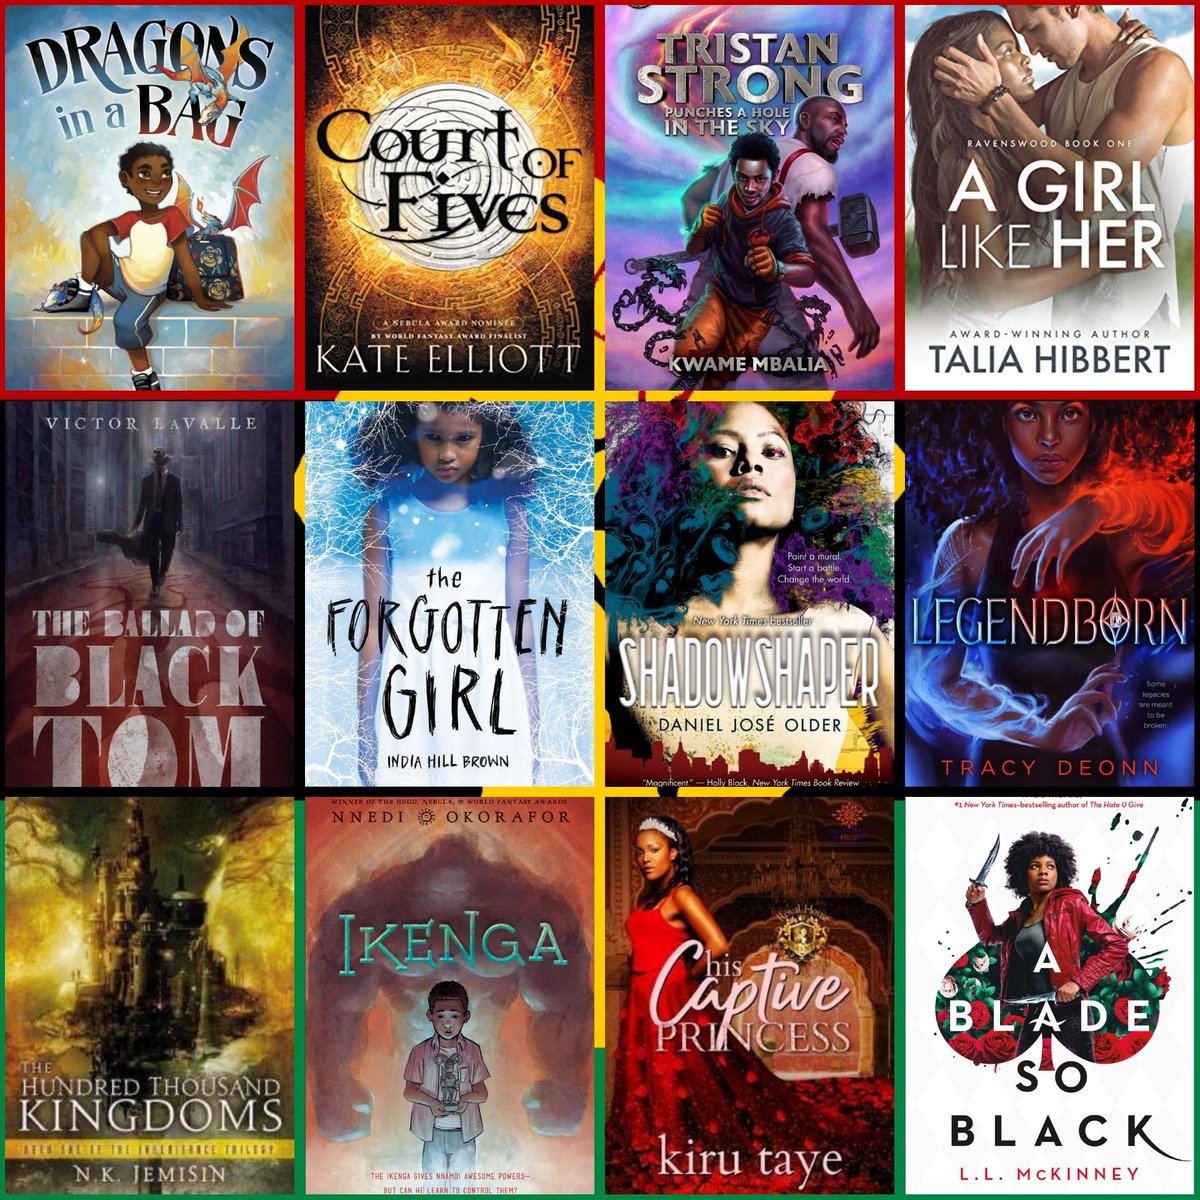 Dragons in a Bag - Zetta ElliottCourt of Fives - Kate Elliott*Tristan Strong Punches a Hole in the Sky - Kwame MbaliaA Girl Like Her - Talia HibbertThe Ballad of Black Tom - Tom LaValleThe Unforgotten Girl - India Hill Brown(cont'd)2/